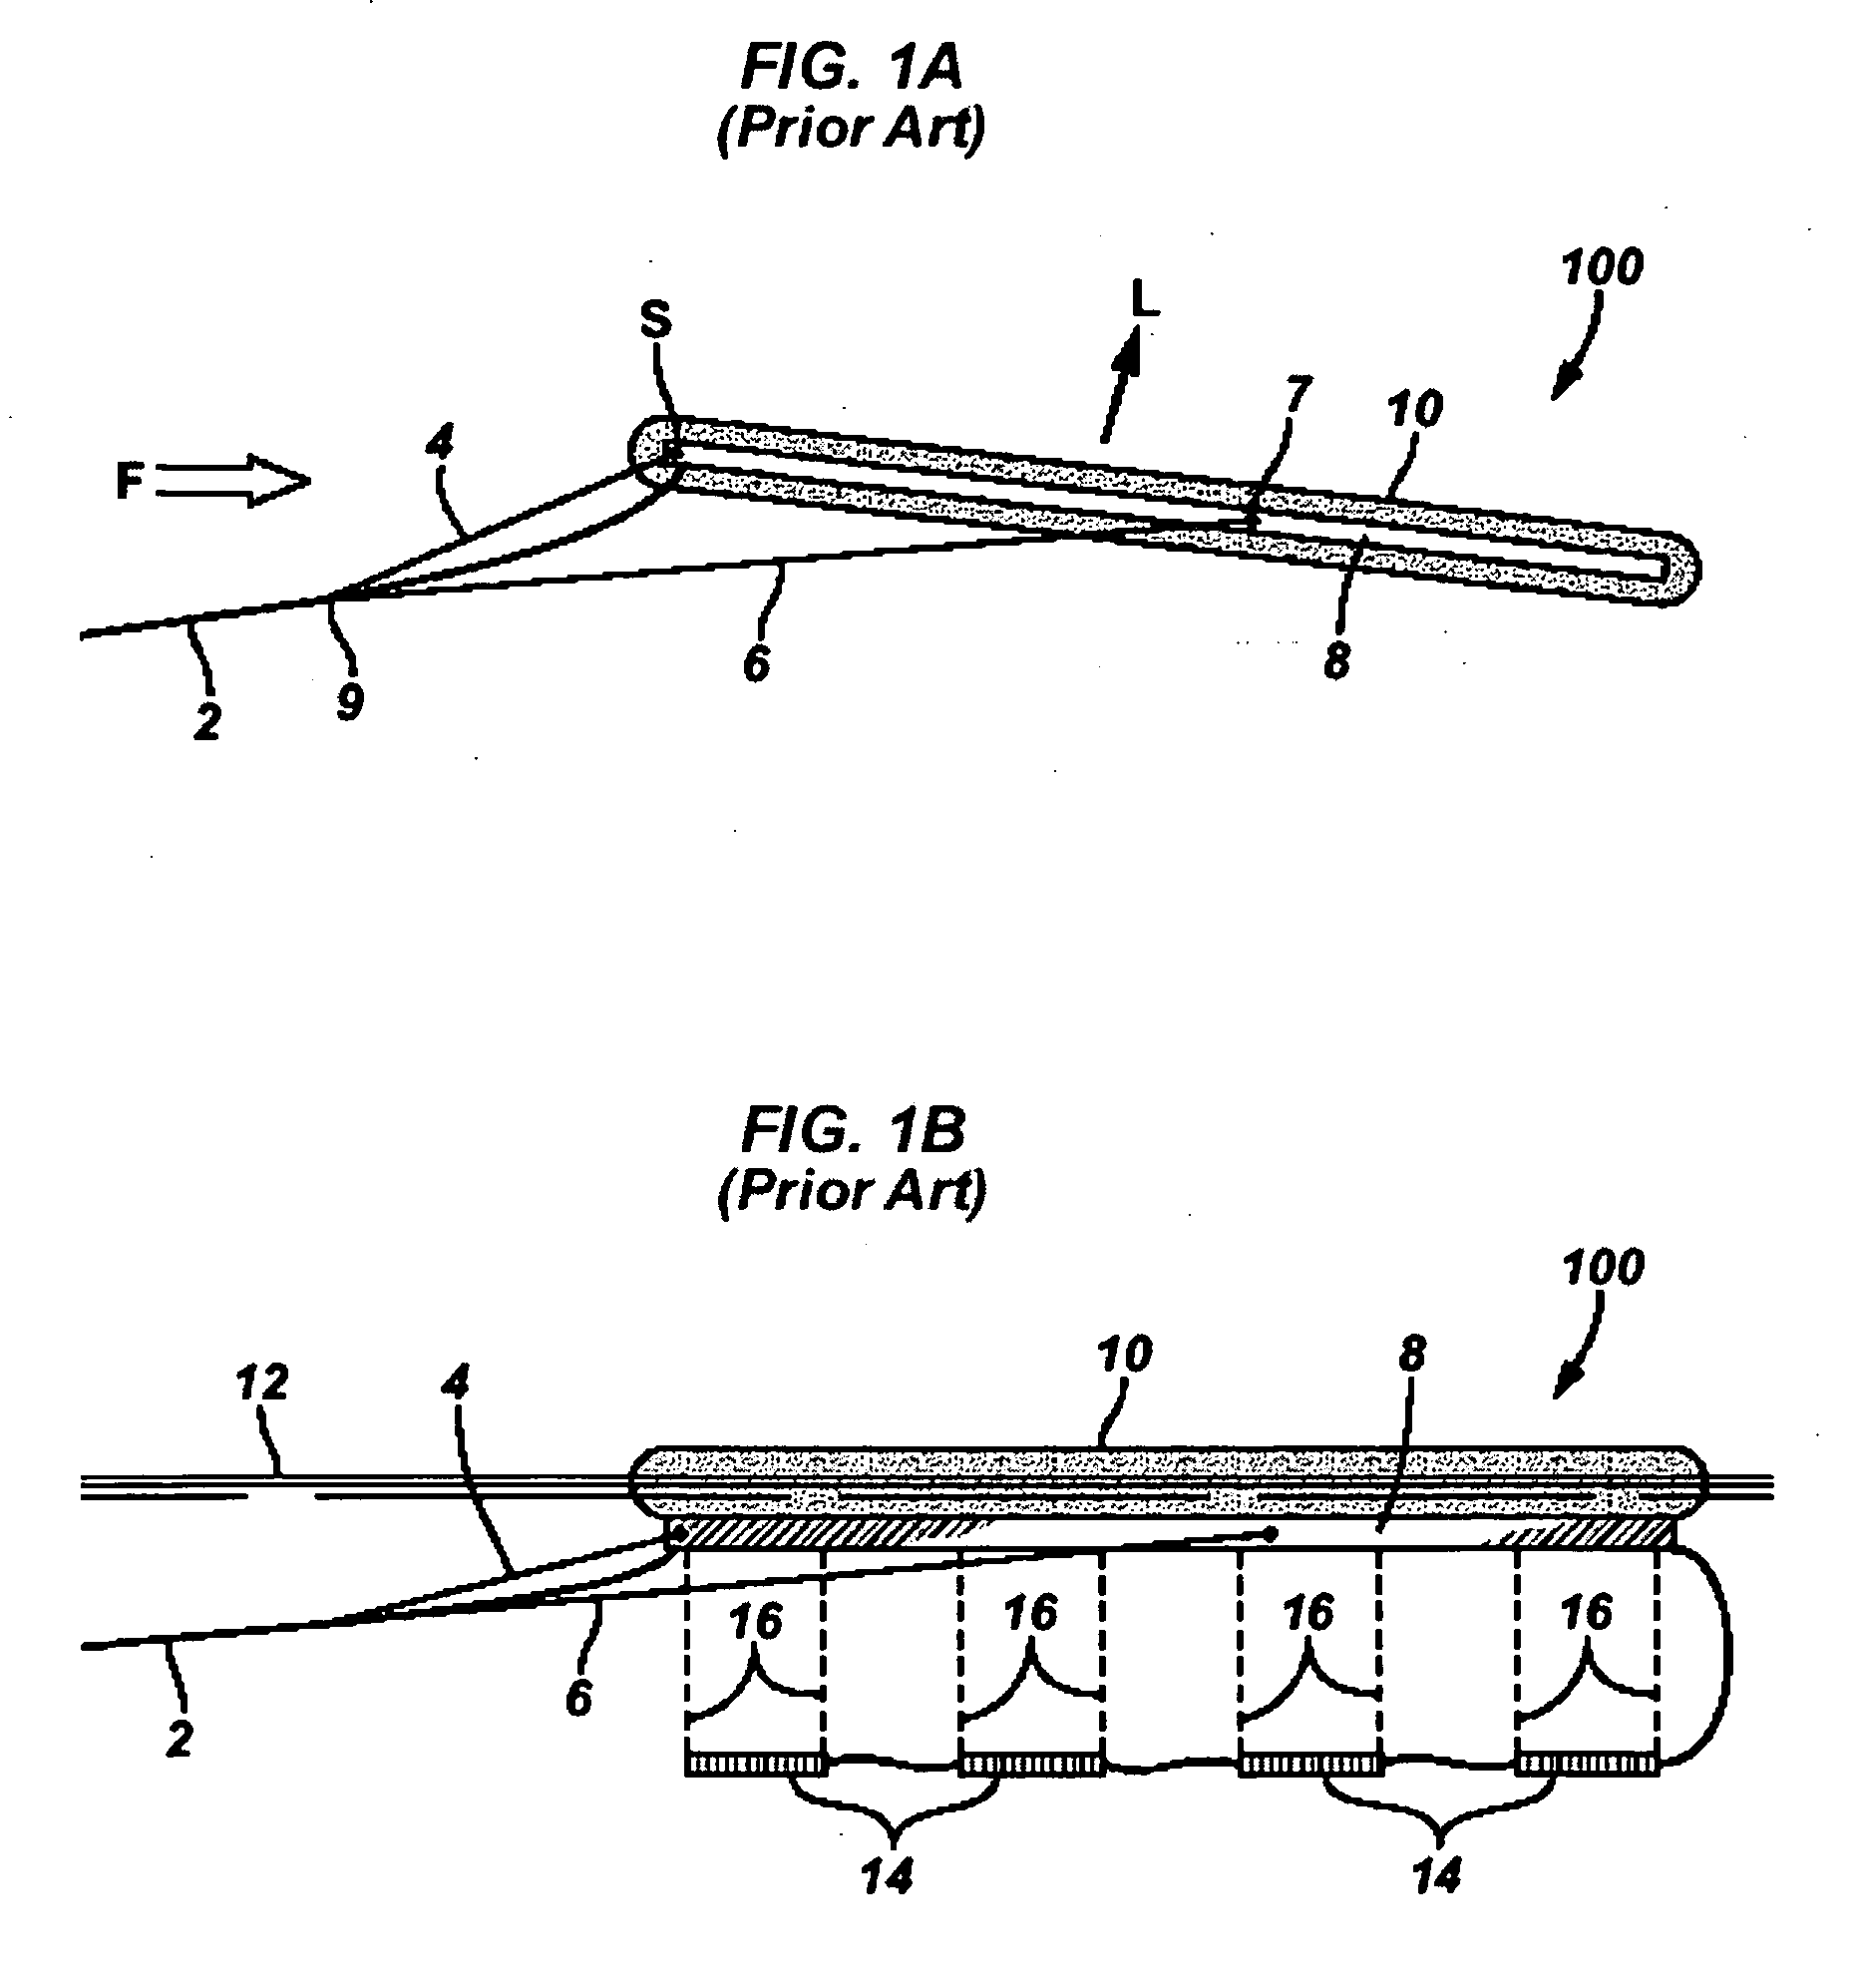 Apparatus and methods for controlling position of marine seismic sources